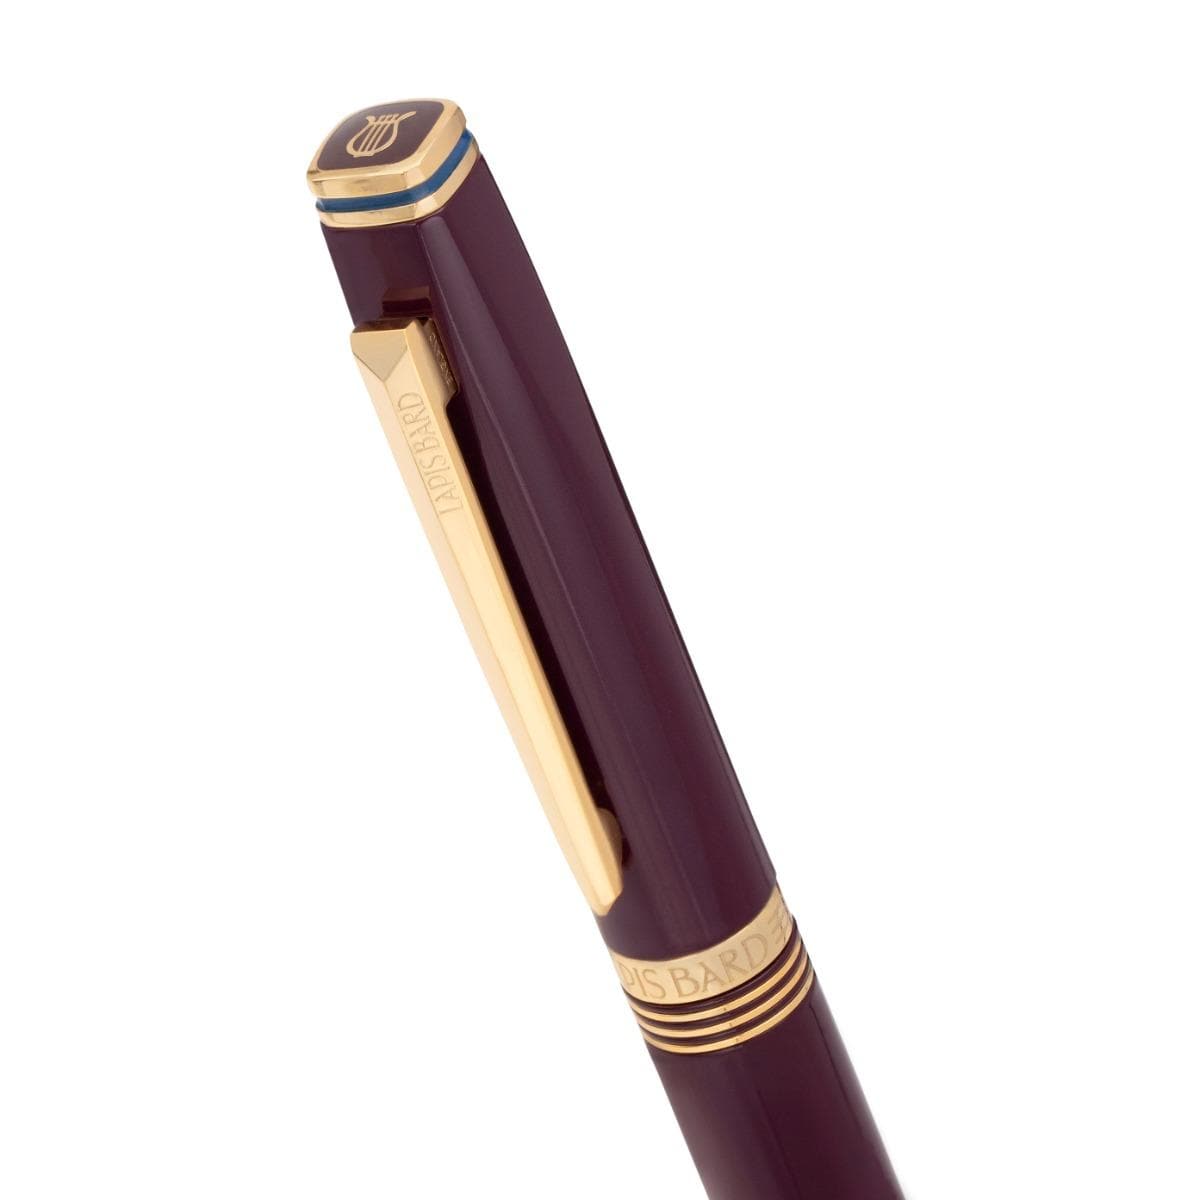 LAPIS BARD Gift Set Contemporary Ballpoint Pen – Bordeaux with Gold Trims WP32780 - Kamal Watch Company